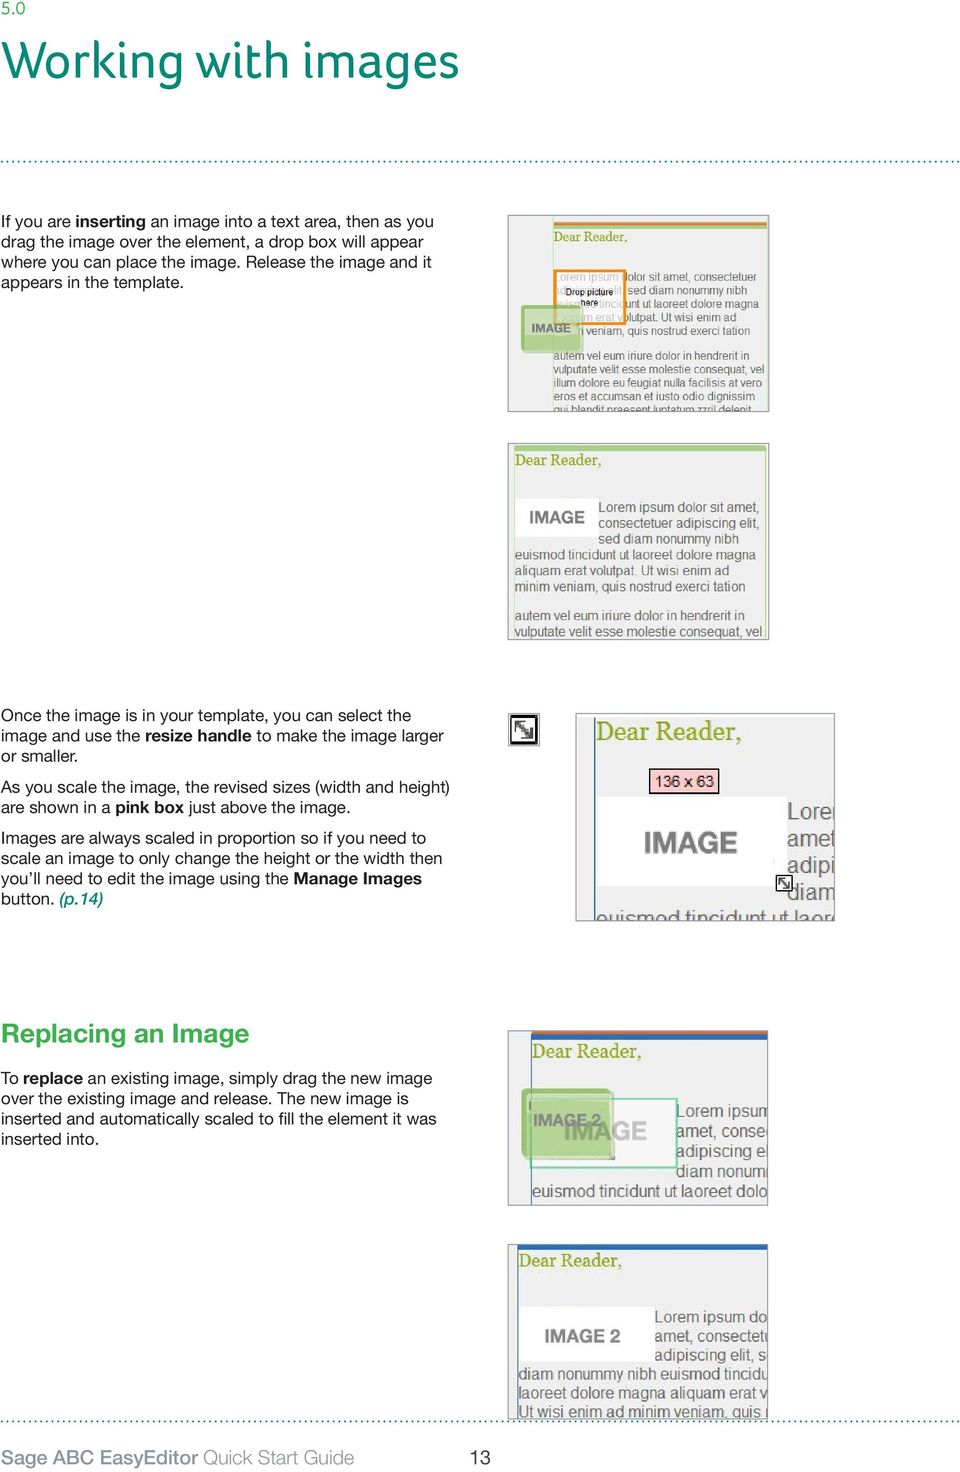 As you scale the image, the revised sizes (width and height) are shown in a pink box just above the image.